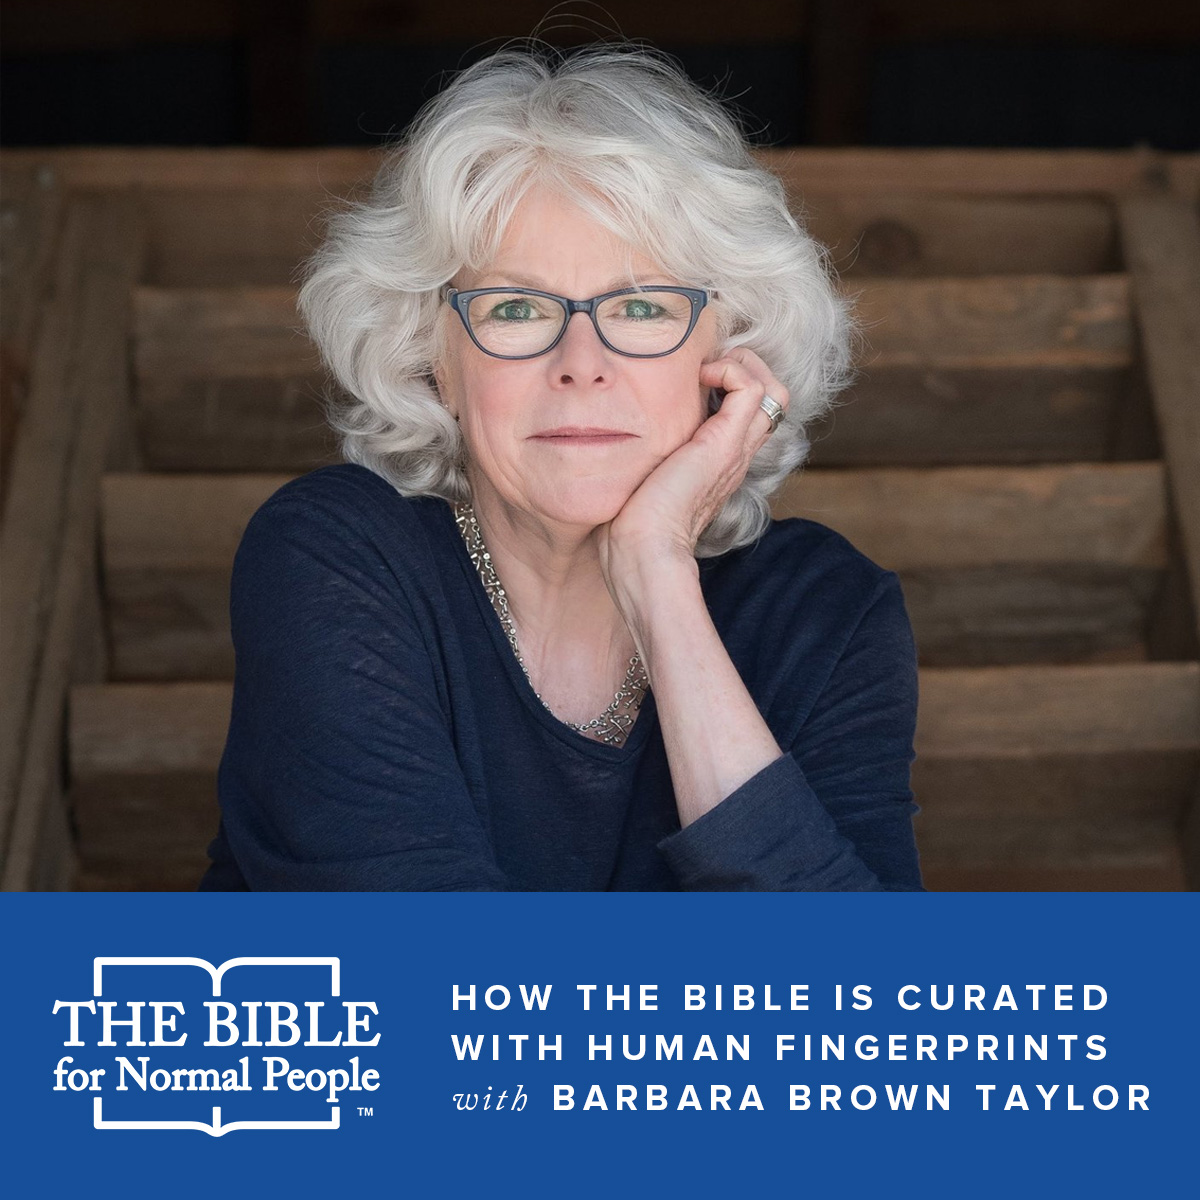 Interview with Barbara Brown Taylor: How the Bible is Curated with Human Fingerprints